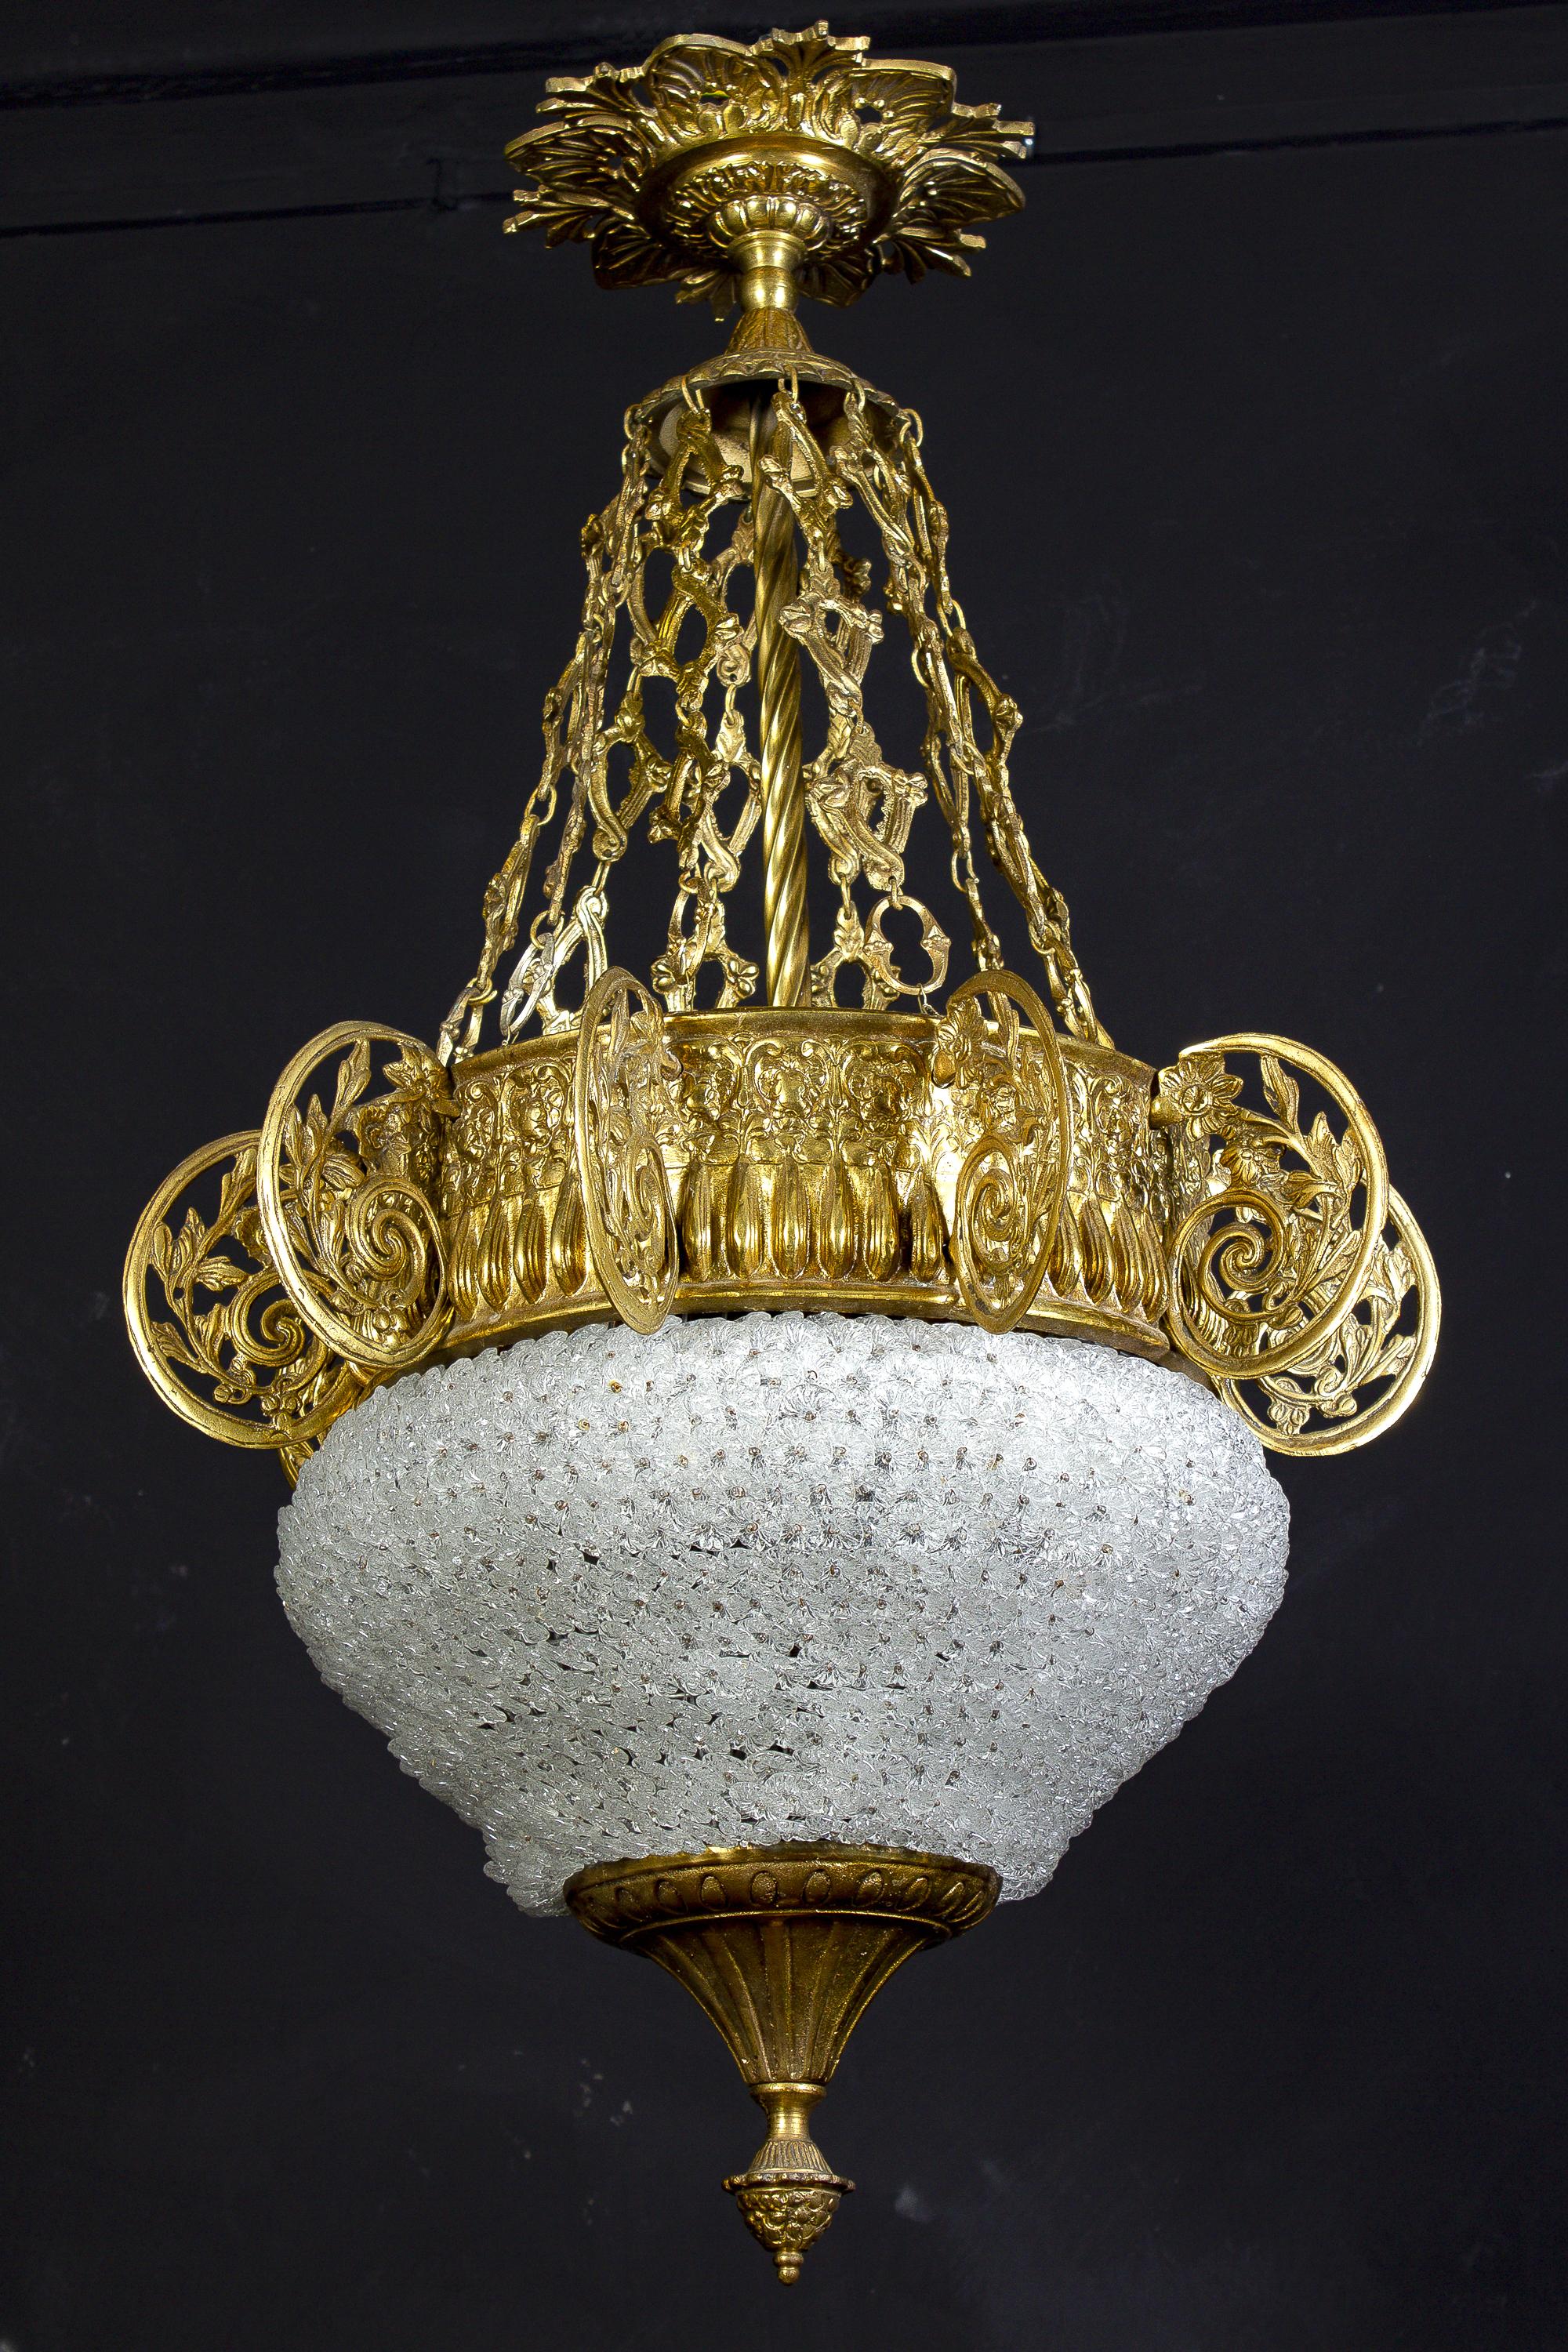 Highly decorative Ormolu mounted Art Deco chandelier, centered by hundreds of delicious small hand blown Murano glass flowers. Beautiful scrolled ormolu elements and chain terminating in a finely decorated canopy.
Six E27 light bulbs suitable for